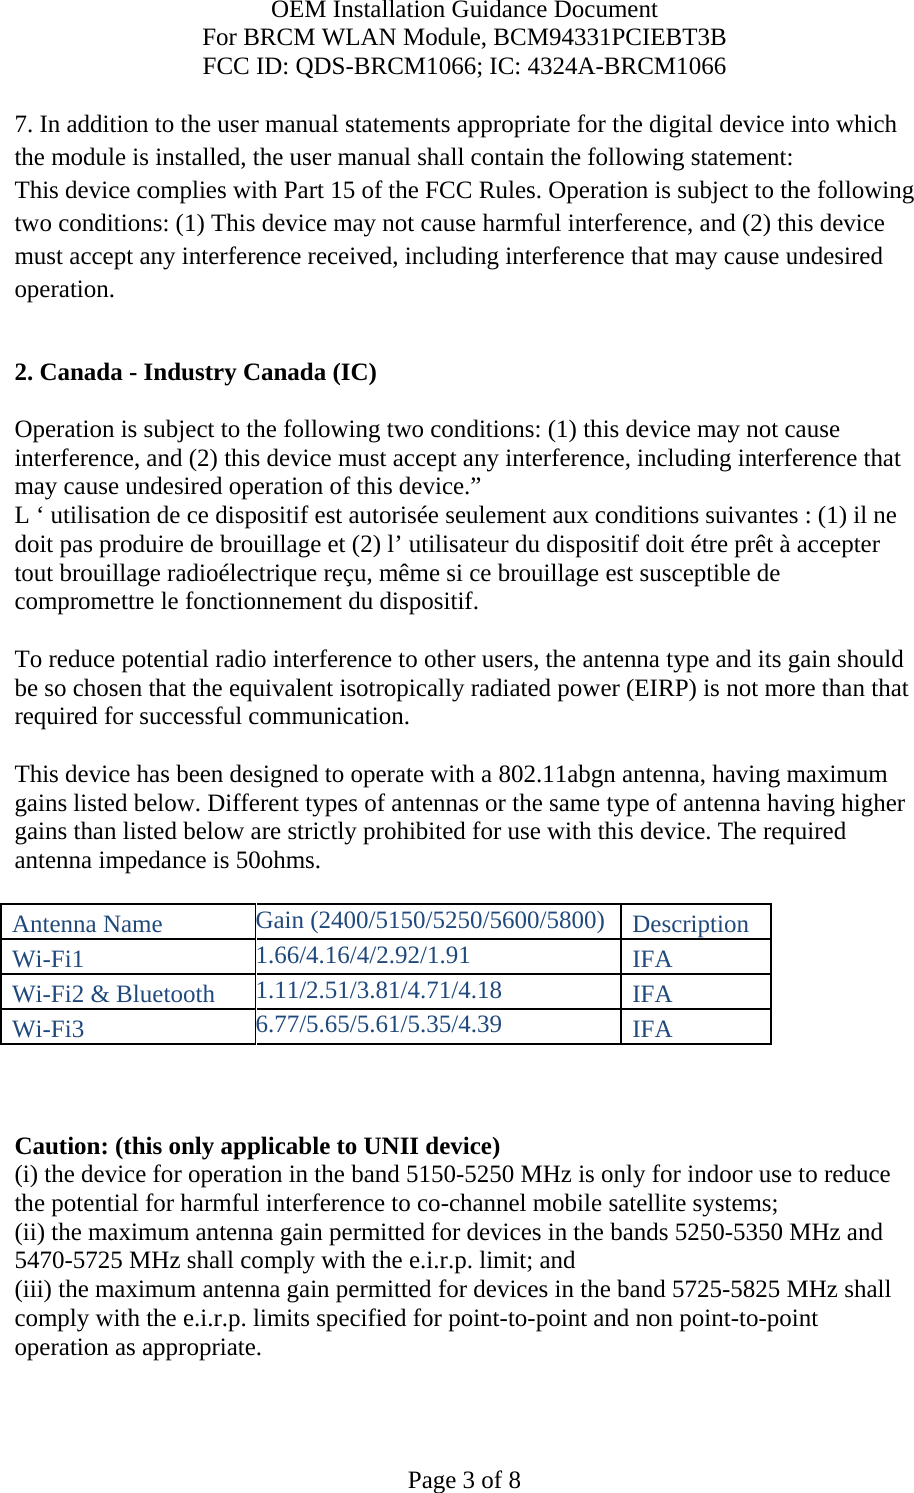 OEM Installation Guidance Document For BRCM WLAN Module, BCM94331PCIEBT3B FCC ID: QDS-BRCM1066; IC: 4324A-BRCM1066  Page 3 of 8 7. In addition to the user manual statements appropriate for the digital device into which the module is installed, the user manual shall contain the following statement: This device complies with Part 15 of the FCC Rules. Operation is subject to the following two conditions: (1) This device may not cause harmful interference, and (2) this device must accept any interference received, including interference that may cause undesired operation.  2. Canada - Industry Canada (IC)  Operation is subject to the following two conditions: (1) this device may not cause interference, and (2) this device must accept any interference, including interference that may cause undesired operation of this device.” L ‘ utilisation de ce dispositif est autorisée seulement aux conditions suivantes : (1) il ne doit pas produire de brouillage et (2) l’ utilisateur du dispositif doit étre prêt à accepter tout brouillage radioélectrique reçu, même si ce brouillage est susceptible de compromettre le fonctionnement du dispositif.  To reduce potential radio interference to other users, the antenna type and its gain should be so chosen that the equivalent isotropically radiated power (EIRP) is not more than that required for successful communication.  This device has been designed to operate with a 802.11abgn antenna, having maximum gains listed below. Different types of antennas or the same type of antenna having higher gains than listed below are strictly prohibited for use with this device. The required antenna impedance is 50ohms.  Antenna Name Gain (2400/5150/5250/5600/5800) Description Wi-Fi1 1.66/4.16/4/2.92/1.91 IFA Wi-Fi2 &amp; Bluetooth 1.11/2.51/3.81/4.71/4.18 IFA Wi-Fi3 6.77/5.65/5.61/5.35/4.39 IFA    Caution: (this only applicable to UNII device) (i) the device for operation in the band 5150-5250 MHz is only for indoor use to reduce the potential for harmful interference to co-channel mobile satellite systems; (ii) the maximum antenna gain permitted for devices in the bands 5250-5350 MHz and 5470-5725 MHz shall comply with the e.i.r.p. limit; and (iii) the maximum antenna gain permitted for devices in the band 5725-5825 MHz shall comply with the e.i.r.p. limits specified for point-to-point and non point-to-point operation as appropriate. 